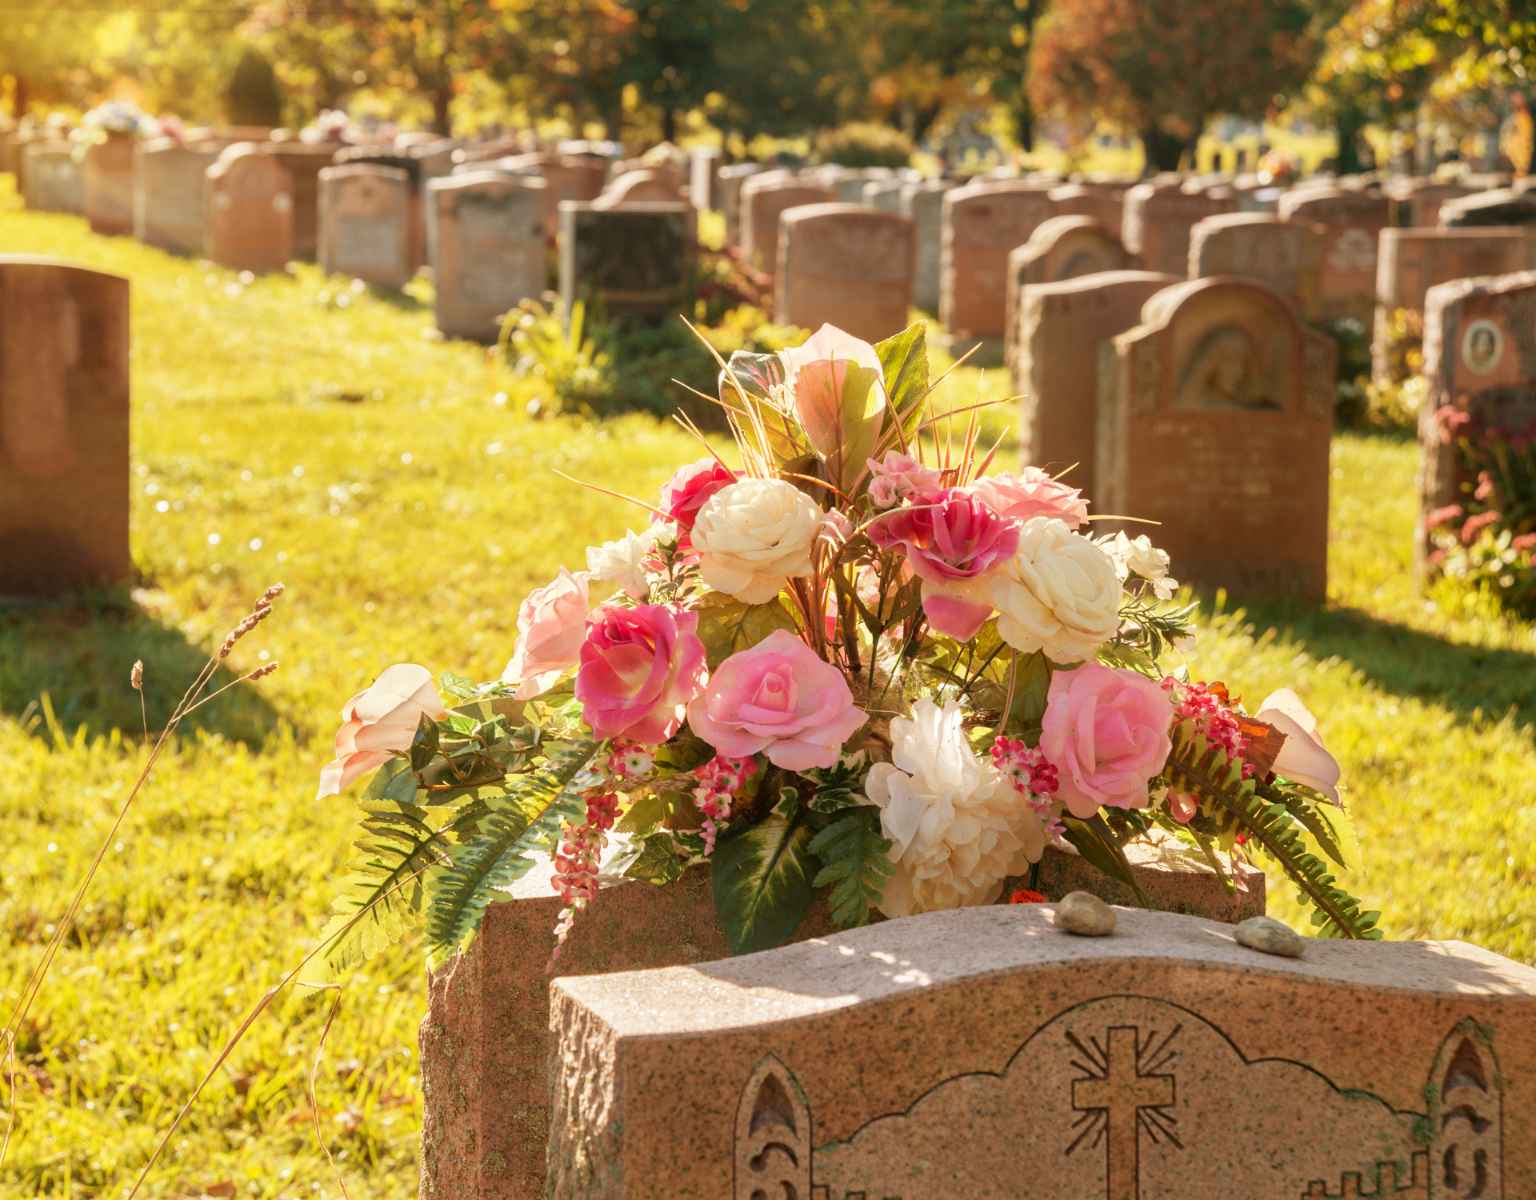 Headstone in cemetery with pink flower arrangement.